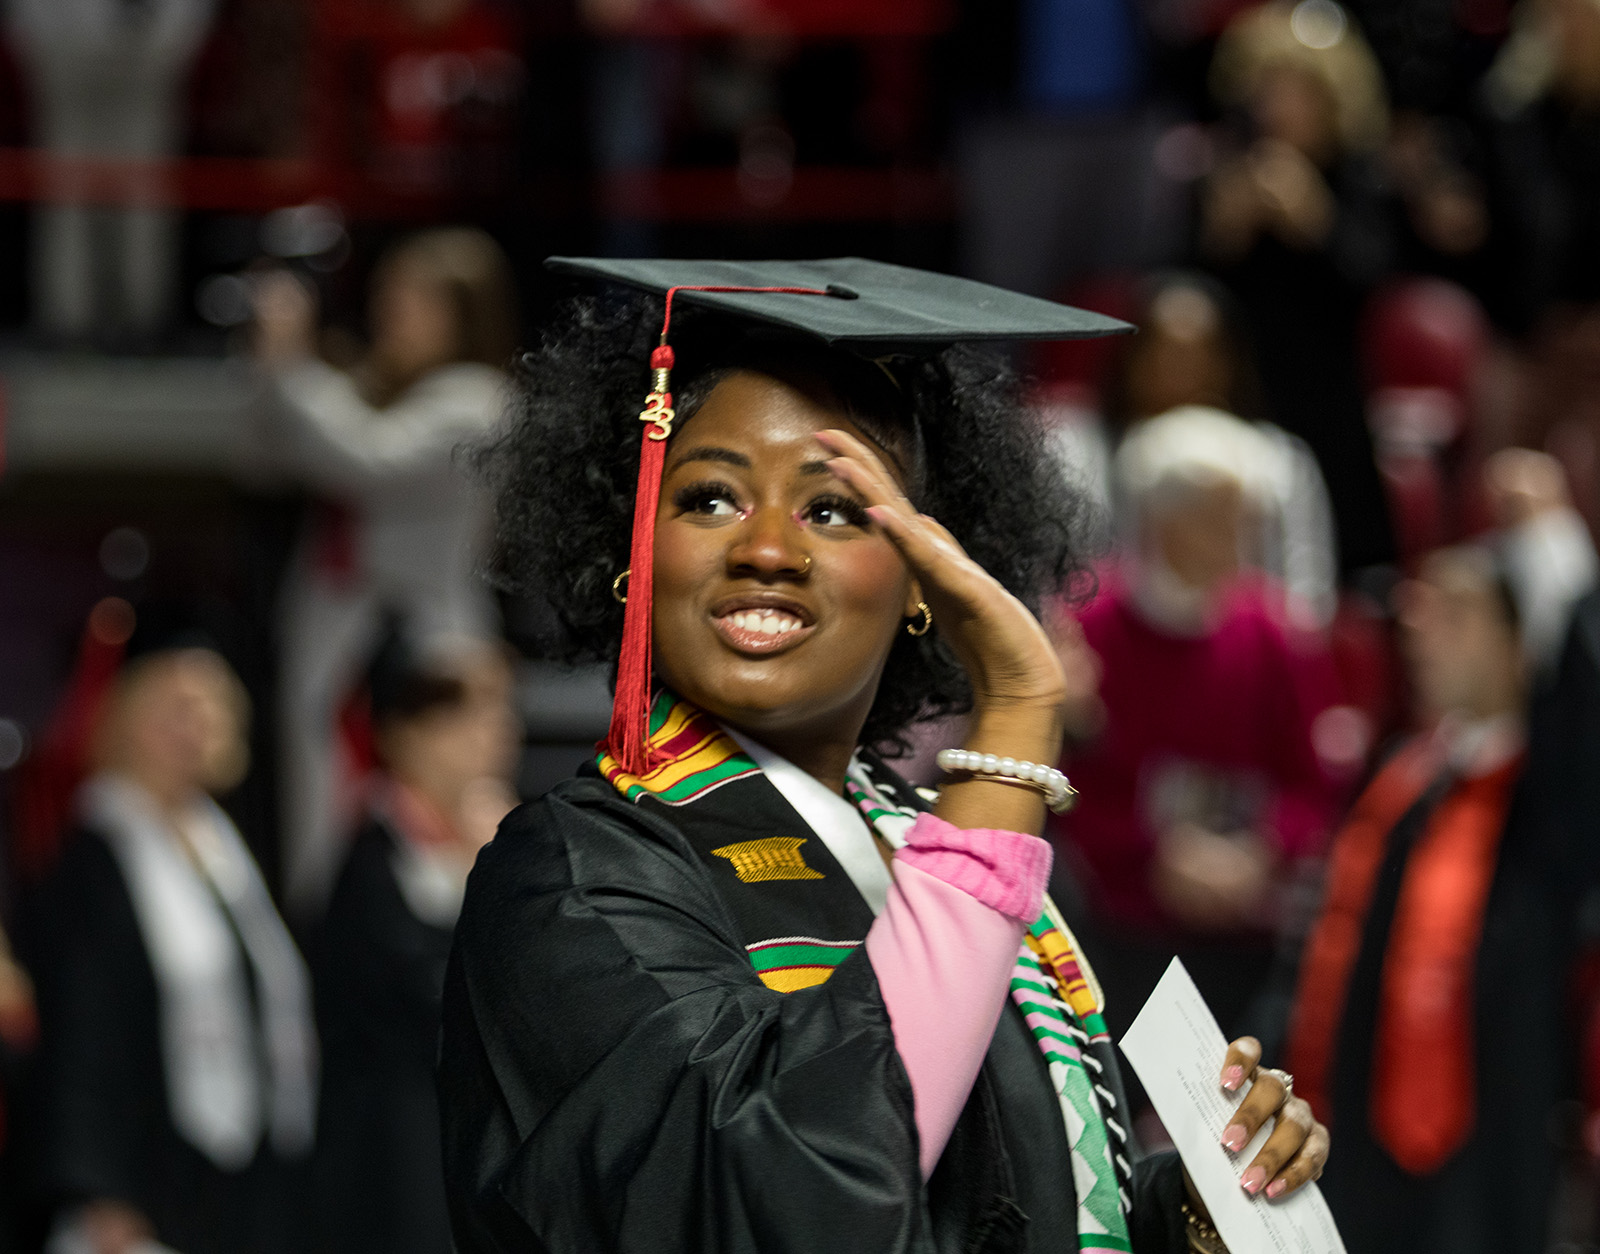 A student graduating during fall commencement with a degree in hand.